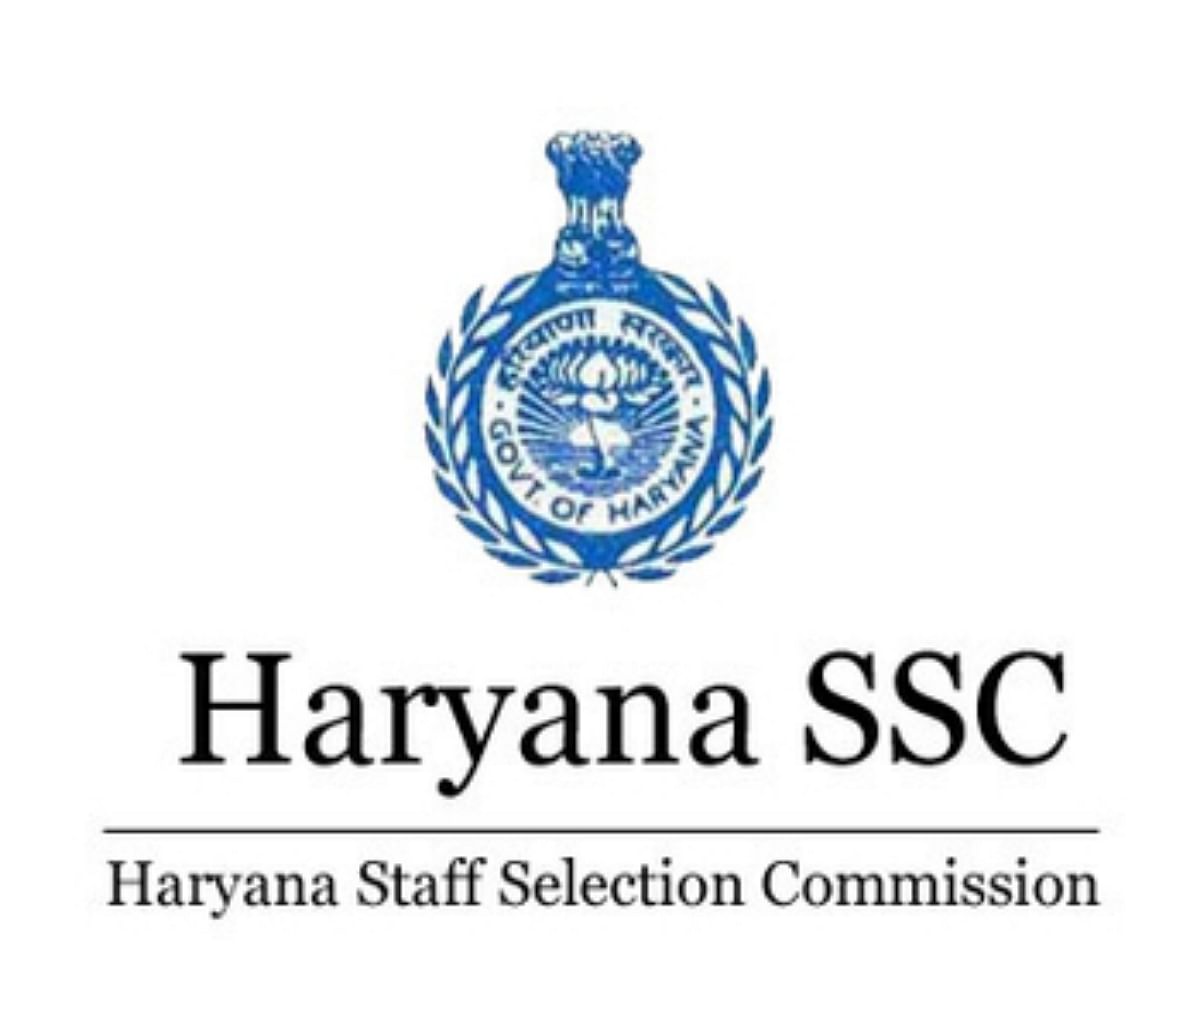 HSSC CET 2022: Applications Invited For 26,000 Group C Posts, Check Exam Syllabus Here